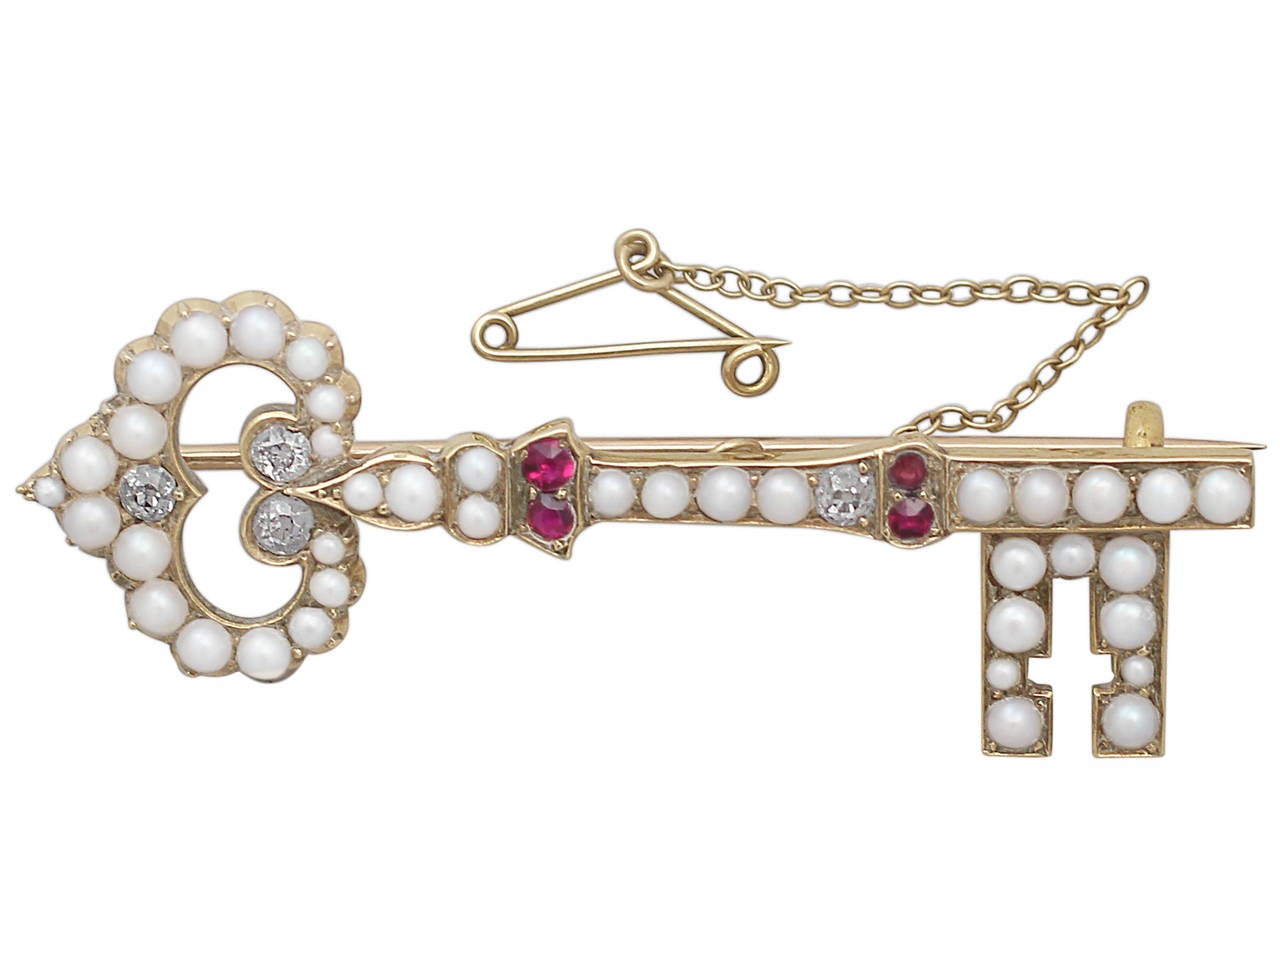 0.32Ct Diamond, Pearl and Ruby 18k Yellow Gold Key Brooch, Antique ...